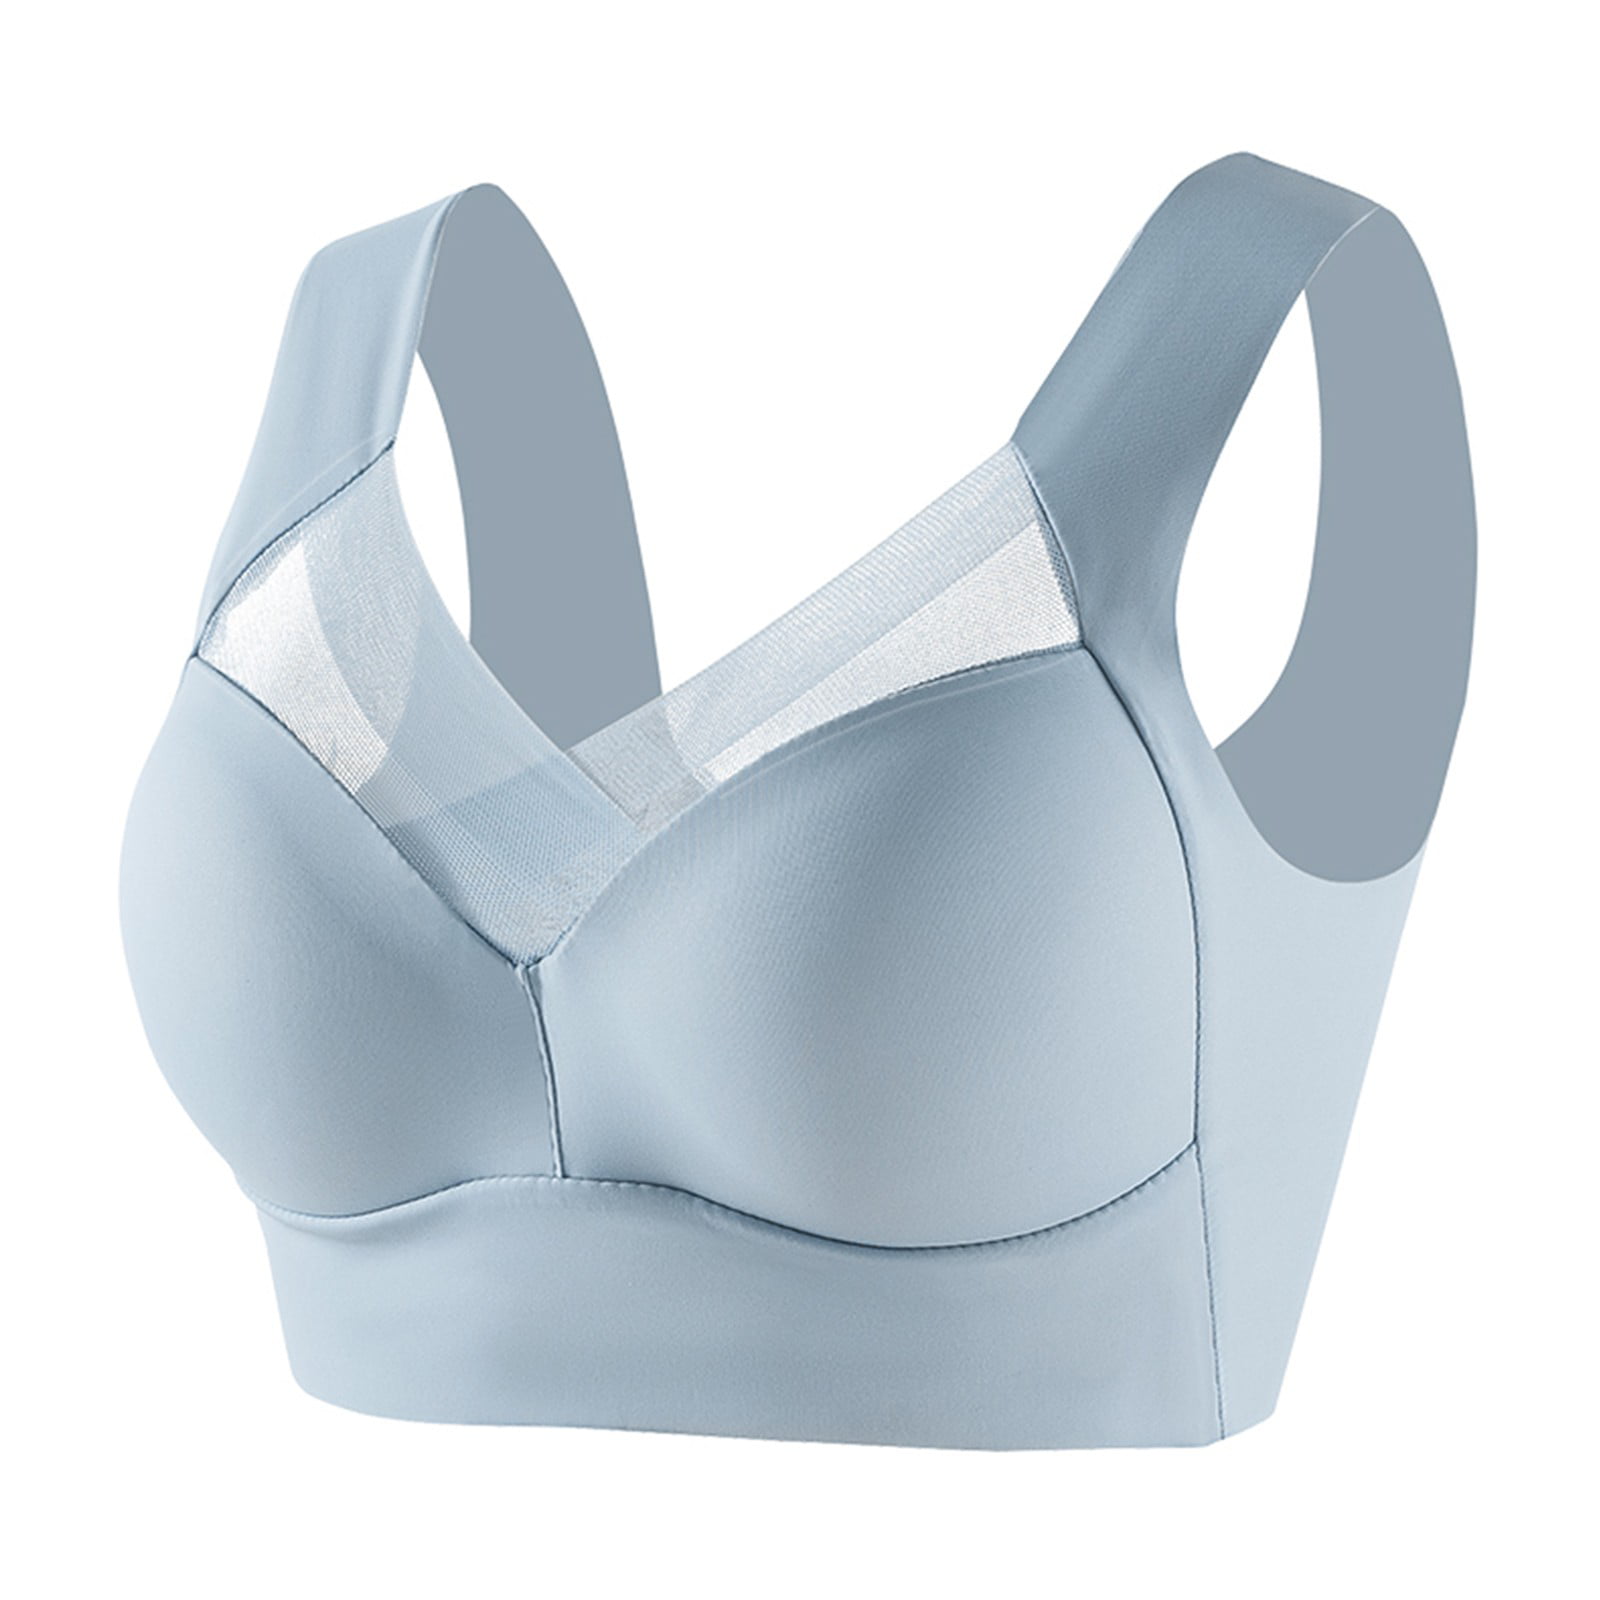 TQWQT Lady Bra Push Up Seamless Thin Wire Free No Constraint Women  Brassieres Daily Wear Clothes,Light Blue XXL 